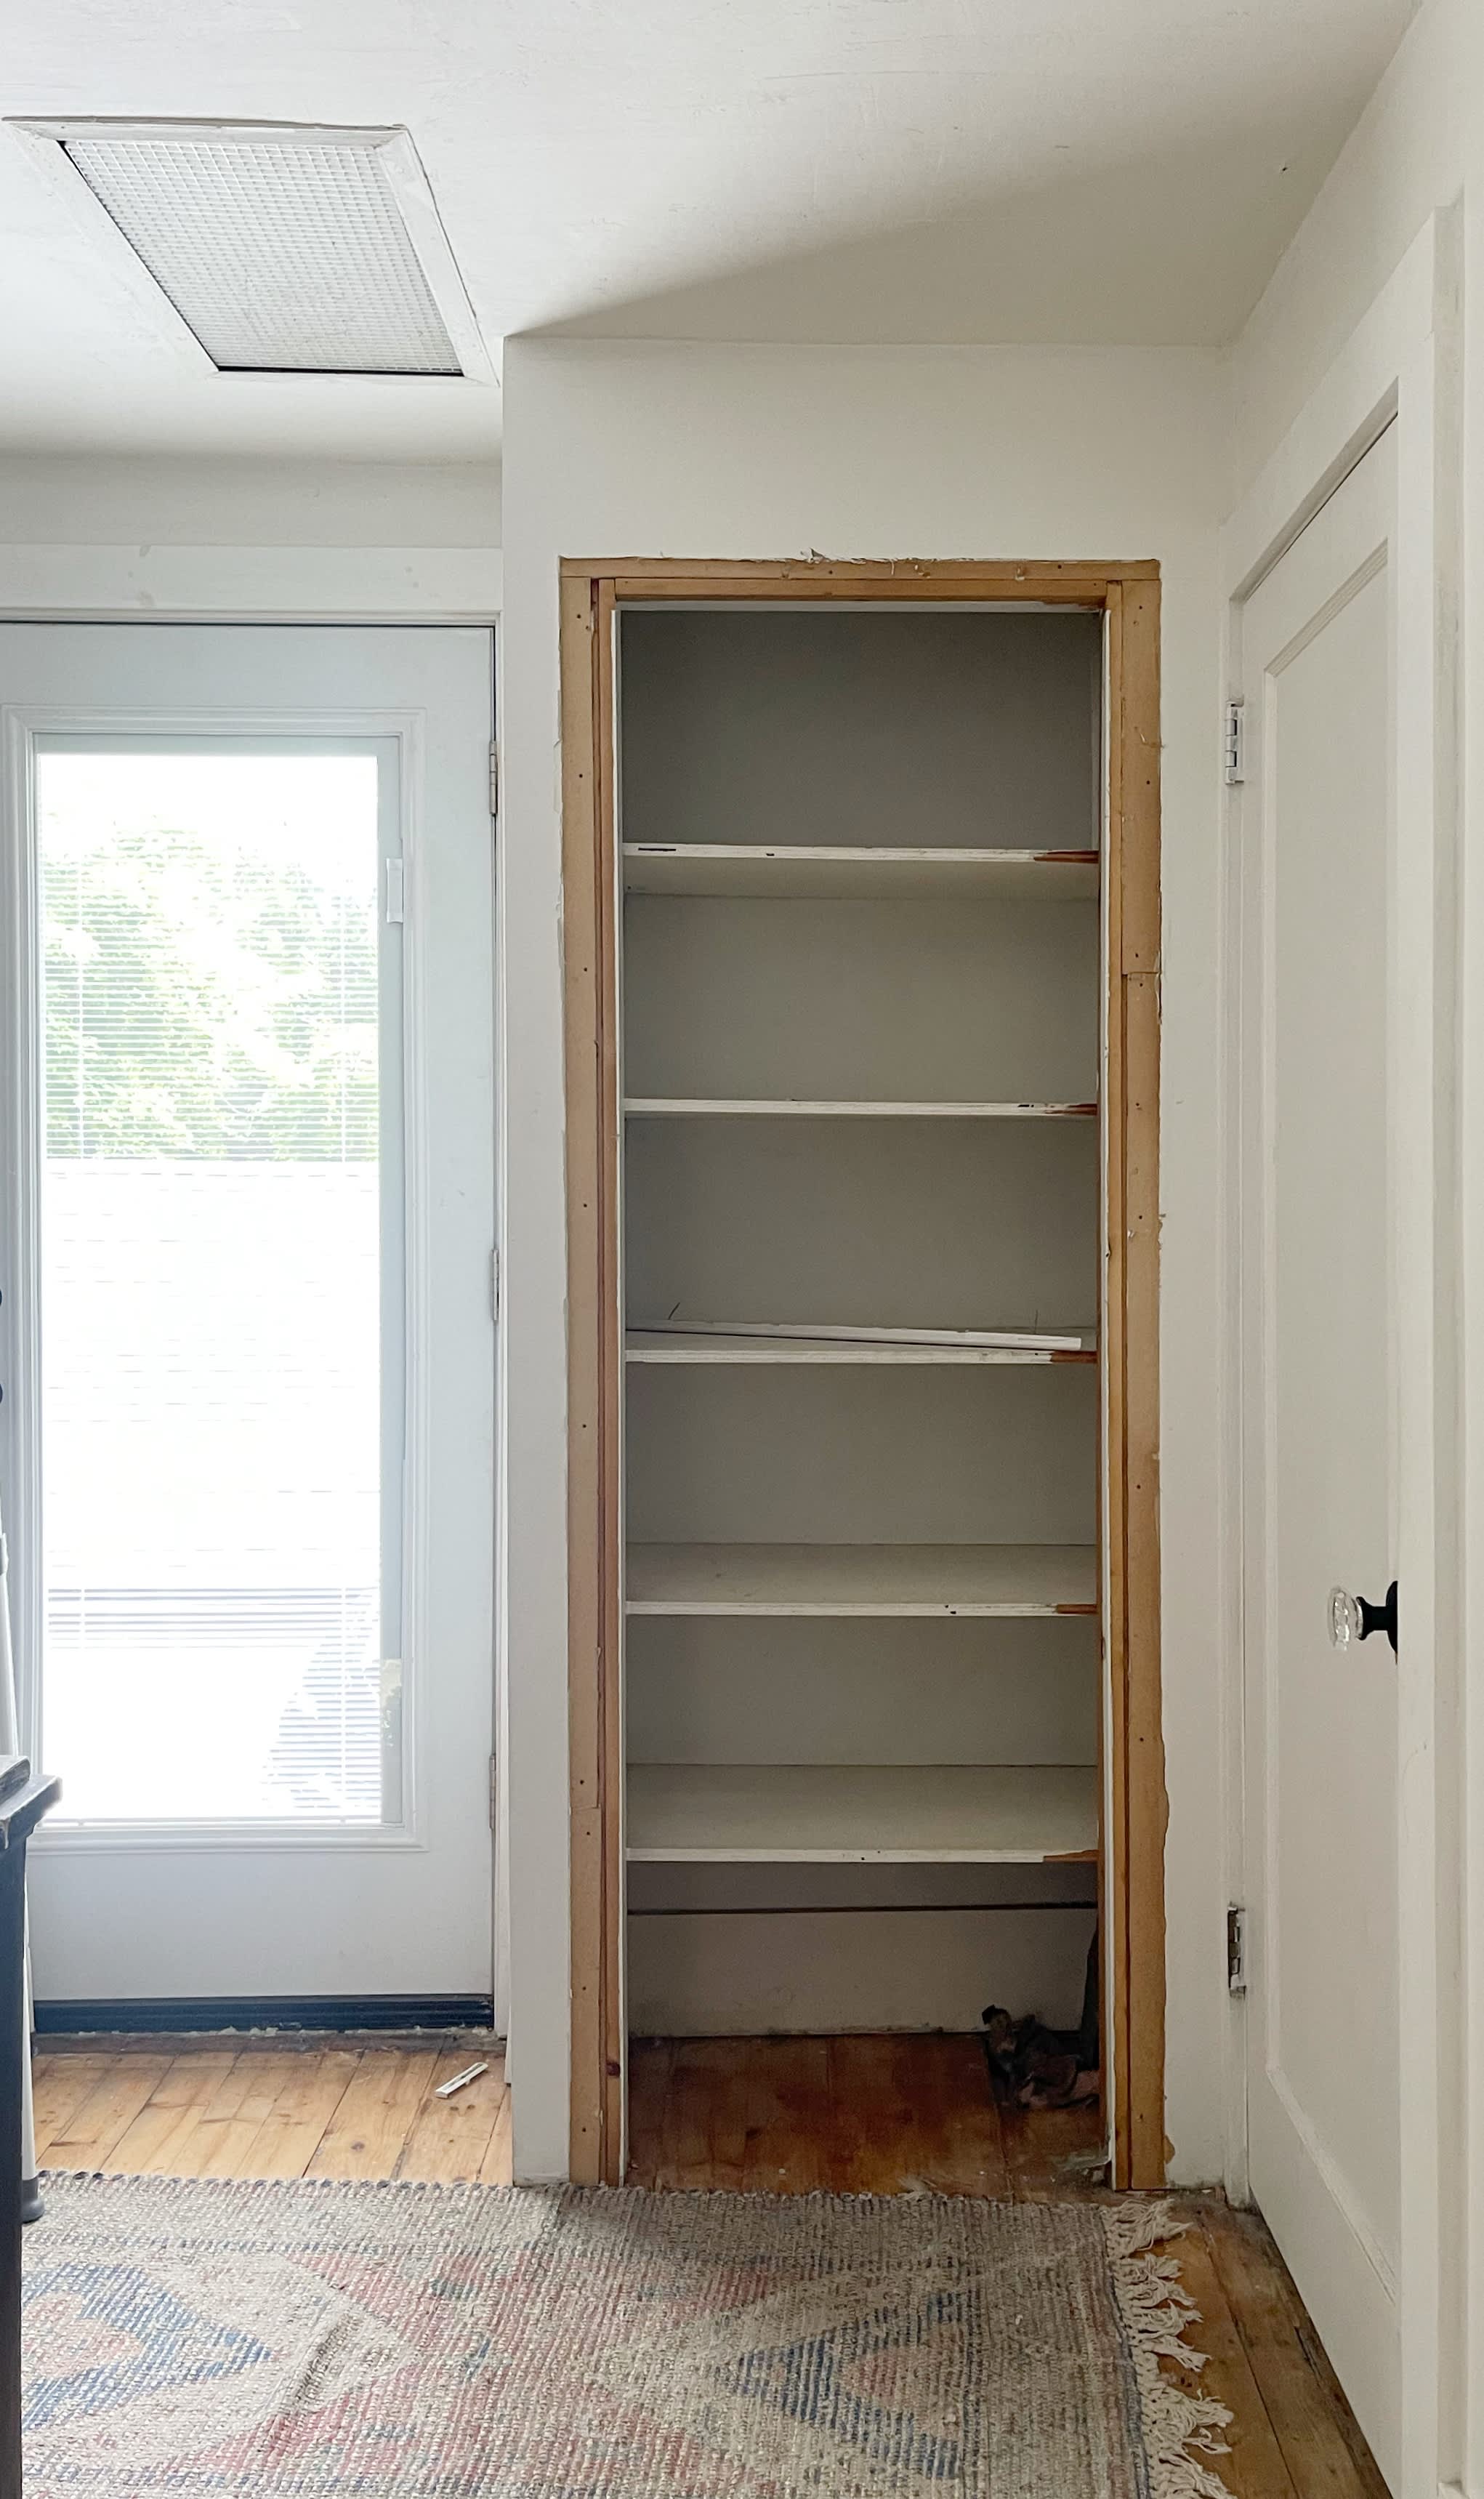 https://cdn.apartmenttherapy.info/image/upload/v1690341419/at/home-projects/2023-07/carli-diy-collective-closet-door/carli-closet-doors-casing-removed.jpg